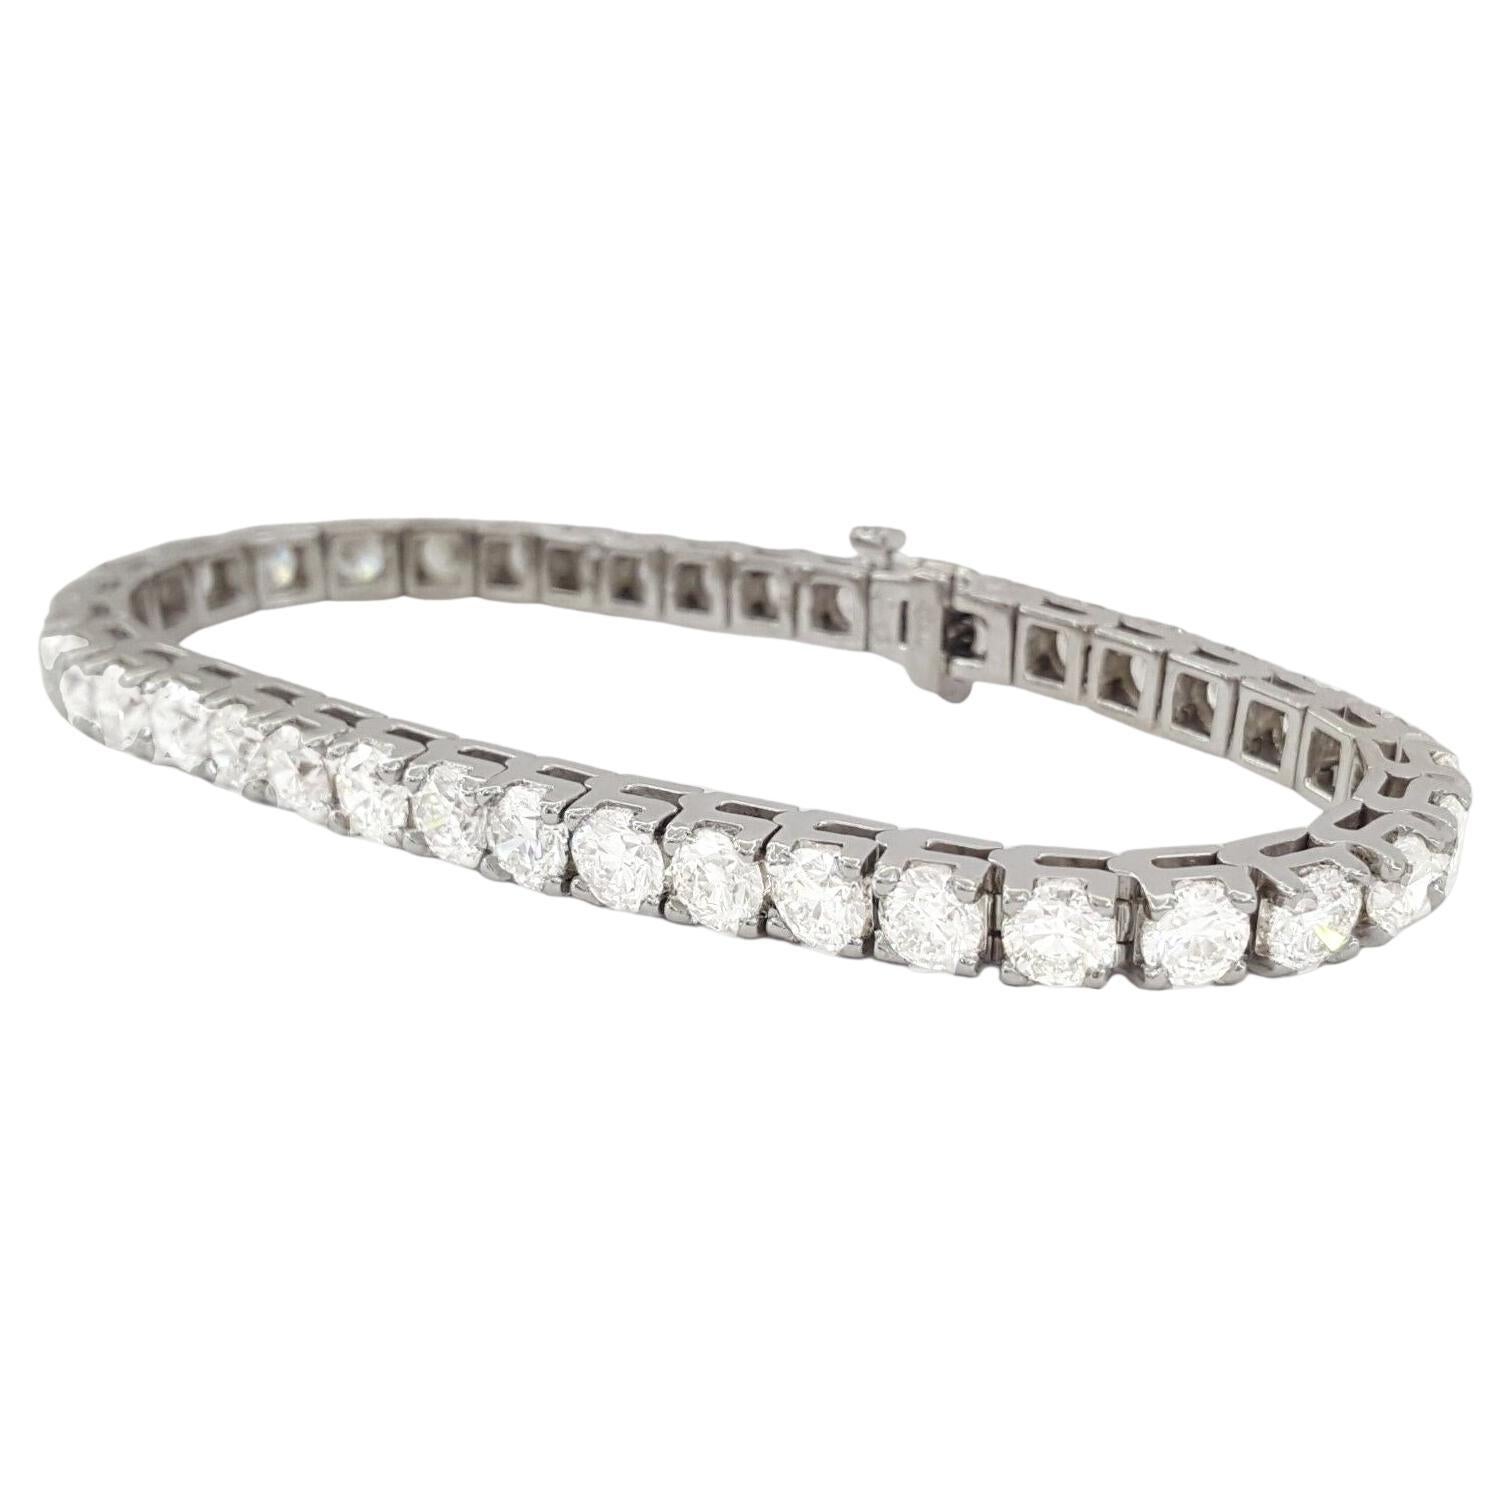 Indulge in the epitome of luxury with our extraordinary 8-carat Diamond Tennis Bracelet, a masterpiece crafted in lustrous 18k White Gold. This enchanting bracelet showcases a single row of impeccably matched diamonds, totaling an impressive 8